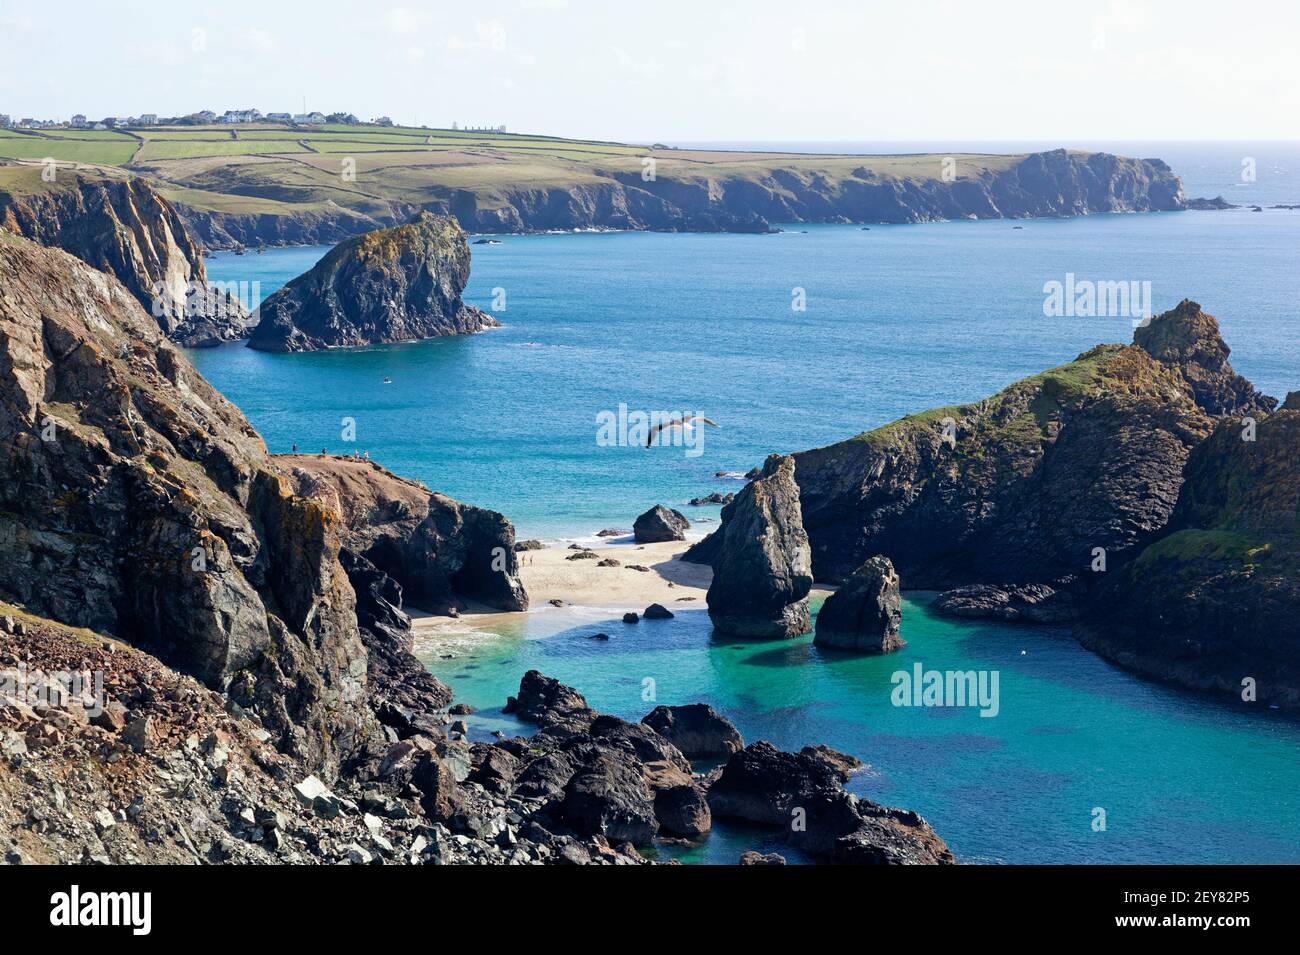 Elevated view to visitors enjoying a sunny day on the beaches at Kynance Cove on the Lizard peninsula in Cornwall, UK Stock Photo